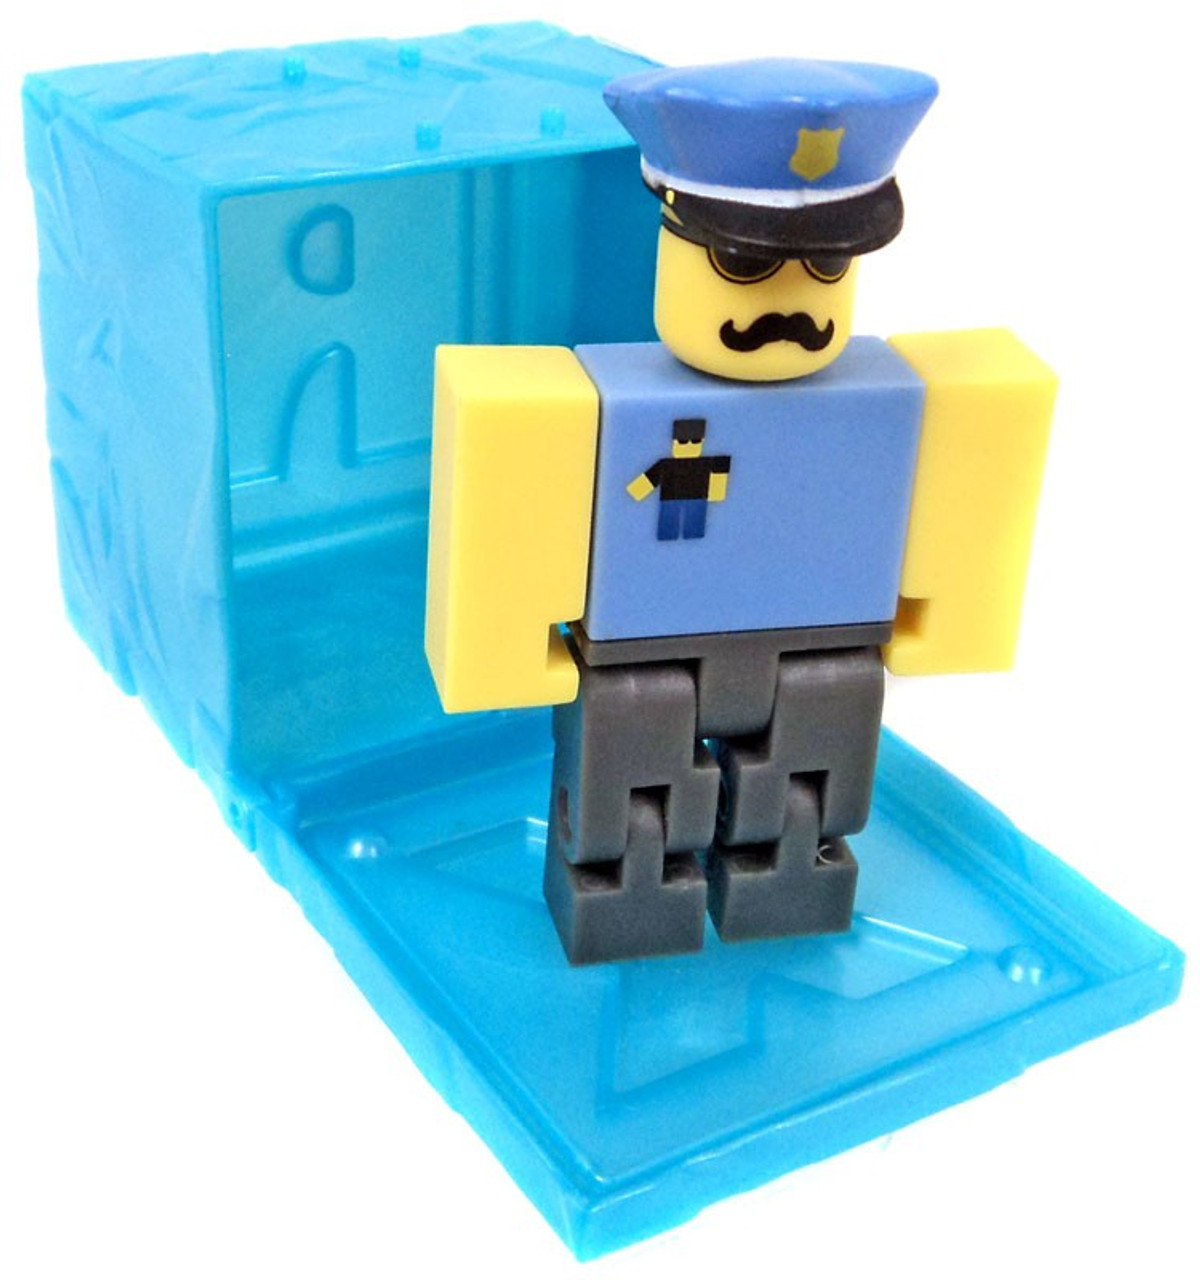 Roblox Red Series 3 Retail Tycoon Rent A Cop 3 Mini Figure Blue Cube With Online Code Loose Jazwares Toywiz - black friday fortnite tycoon roblox